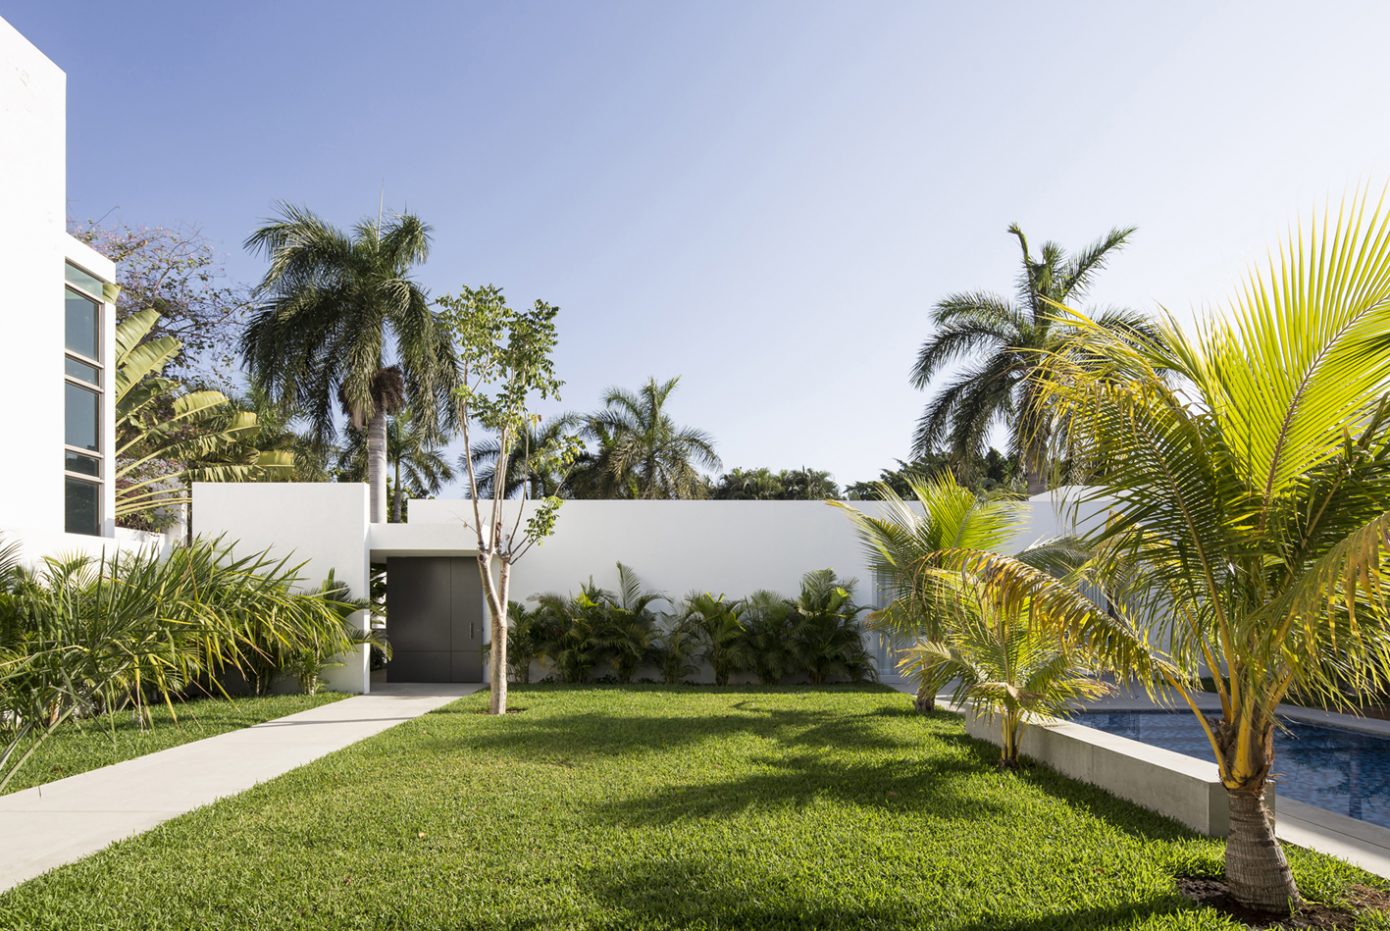 Wide House by Augusto Quijano Arquitectos